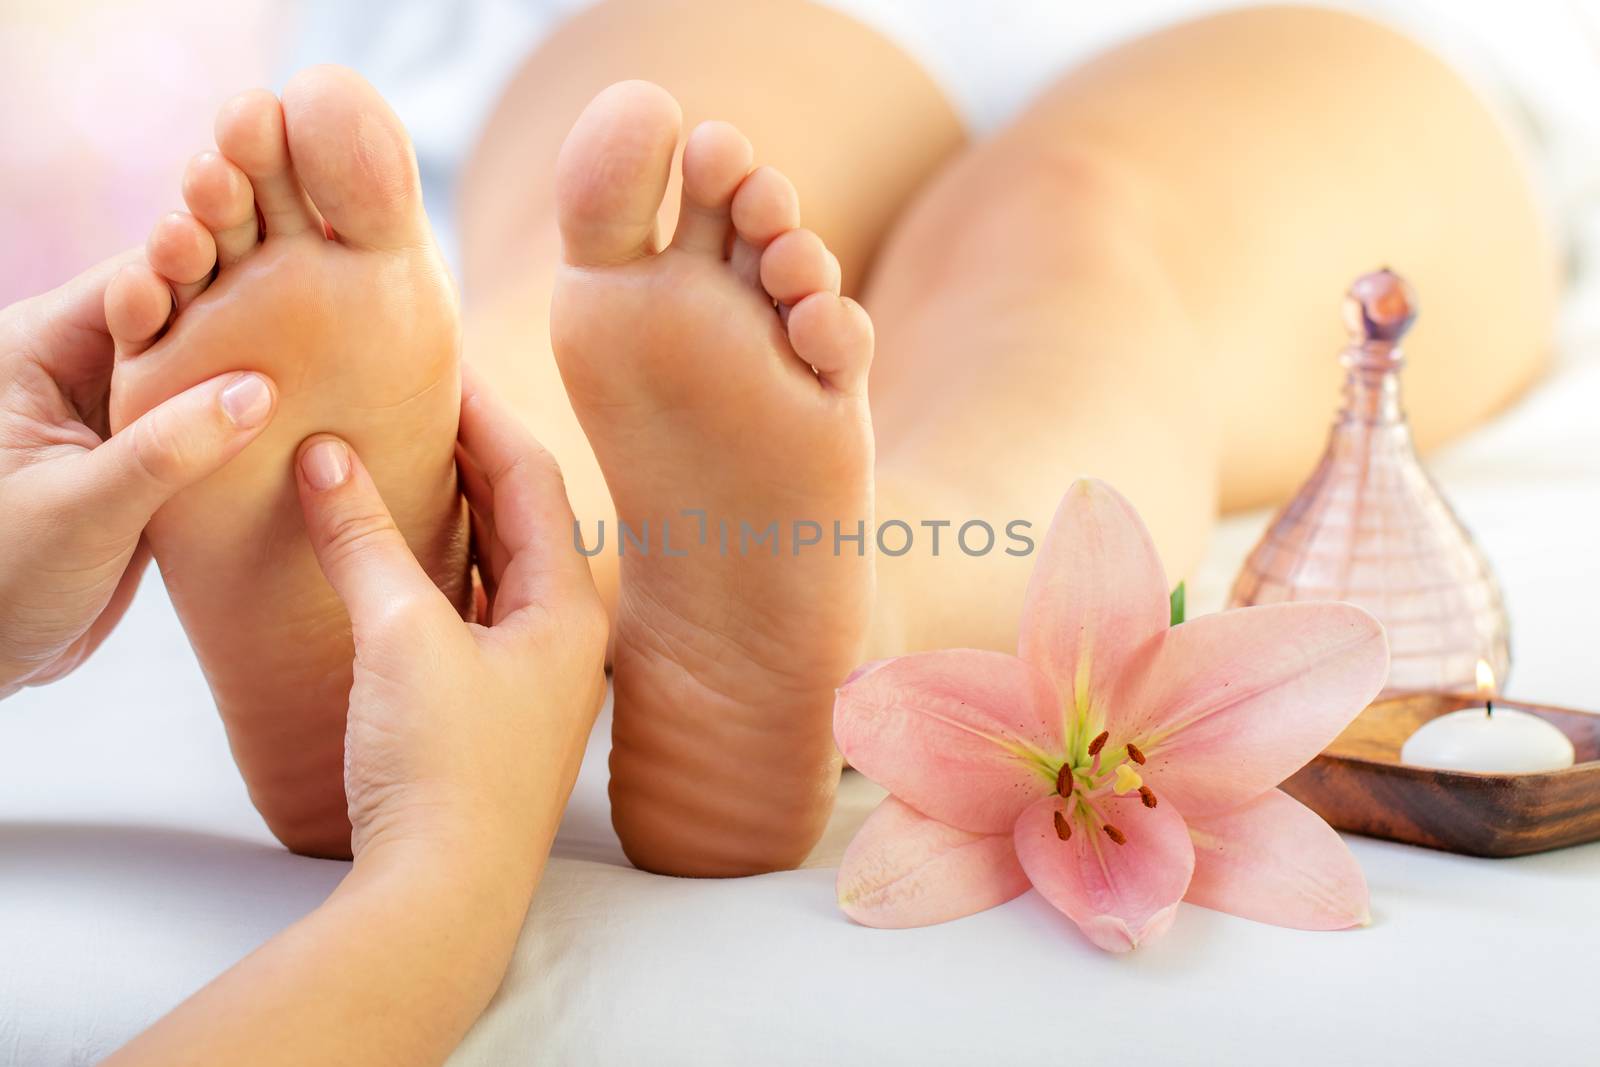 Close up of hands doing foot reflexology massage on female foot. Flower, candle and massage oil next to feet.